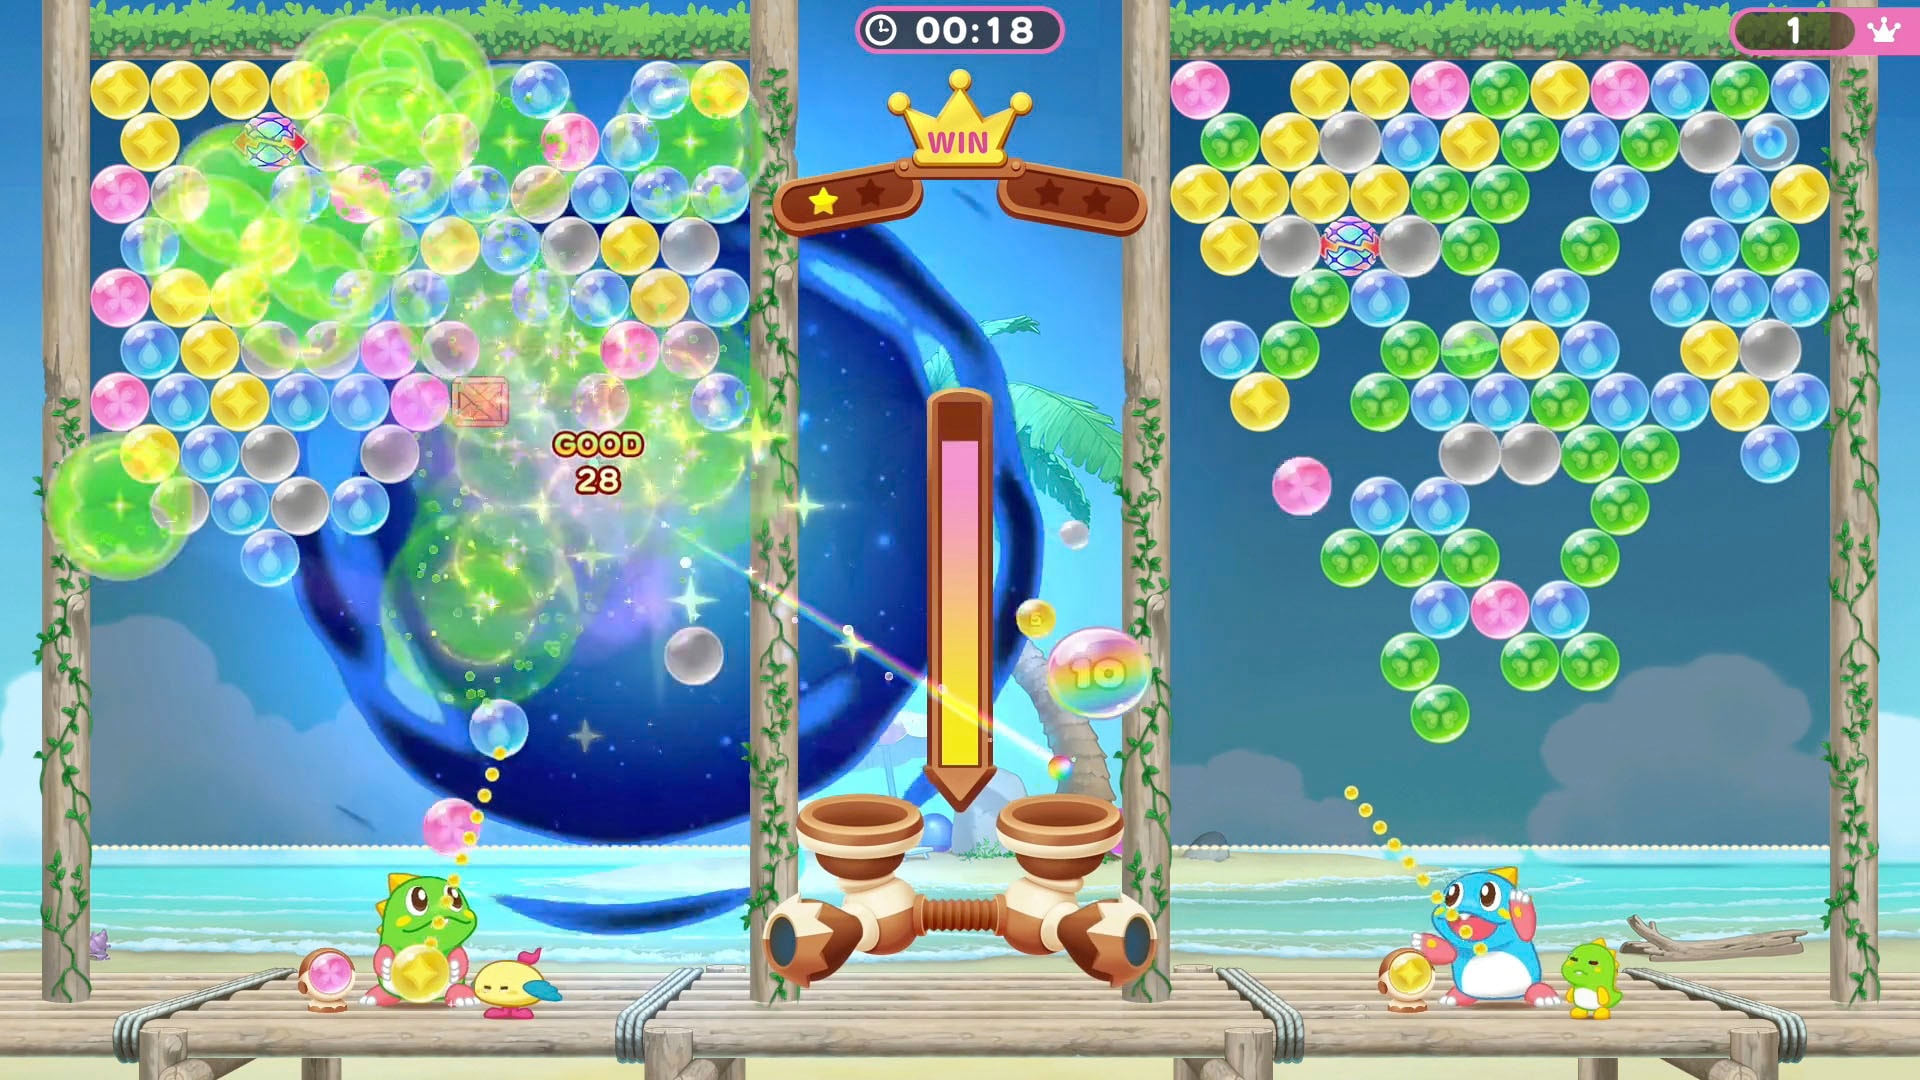 NBG Spielesoftware »Puzzle Bobble Everybubble!«, Nintendo Switch